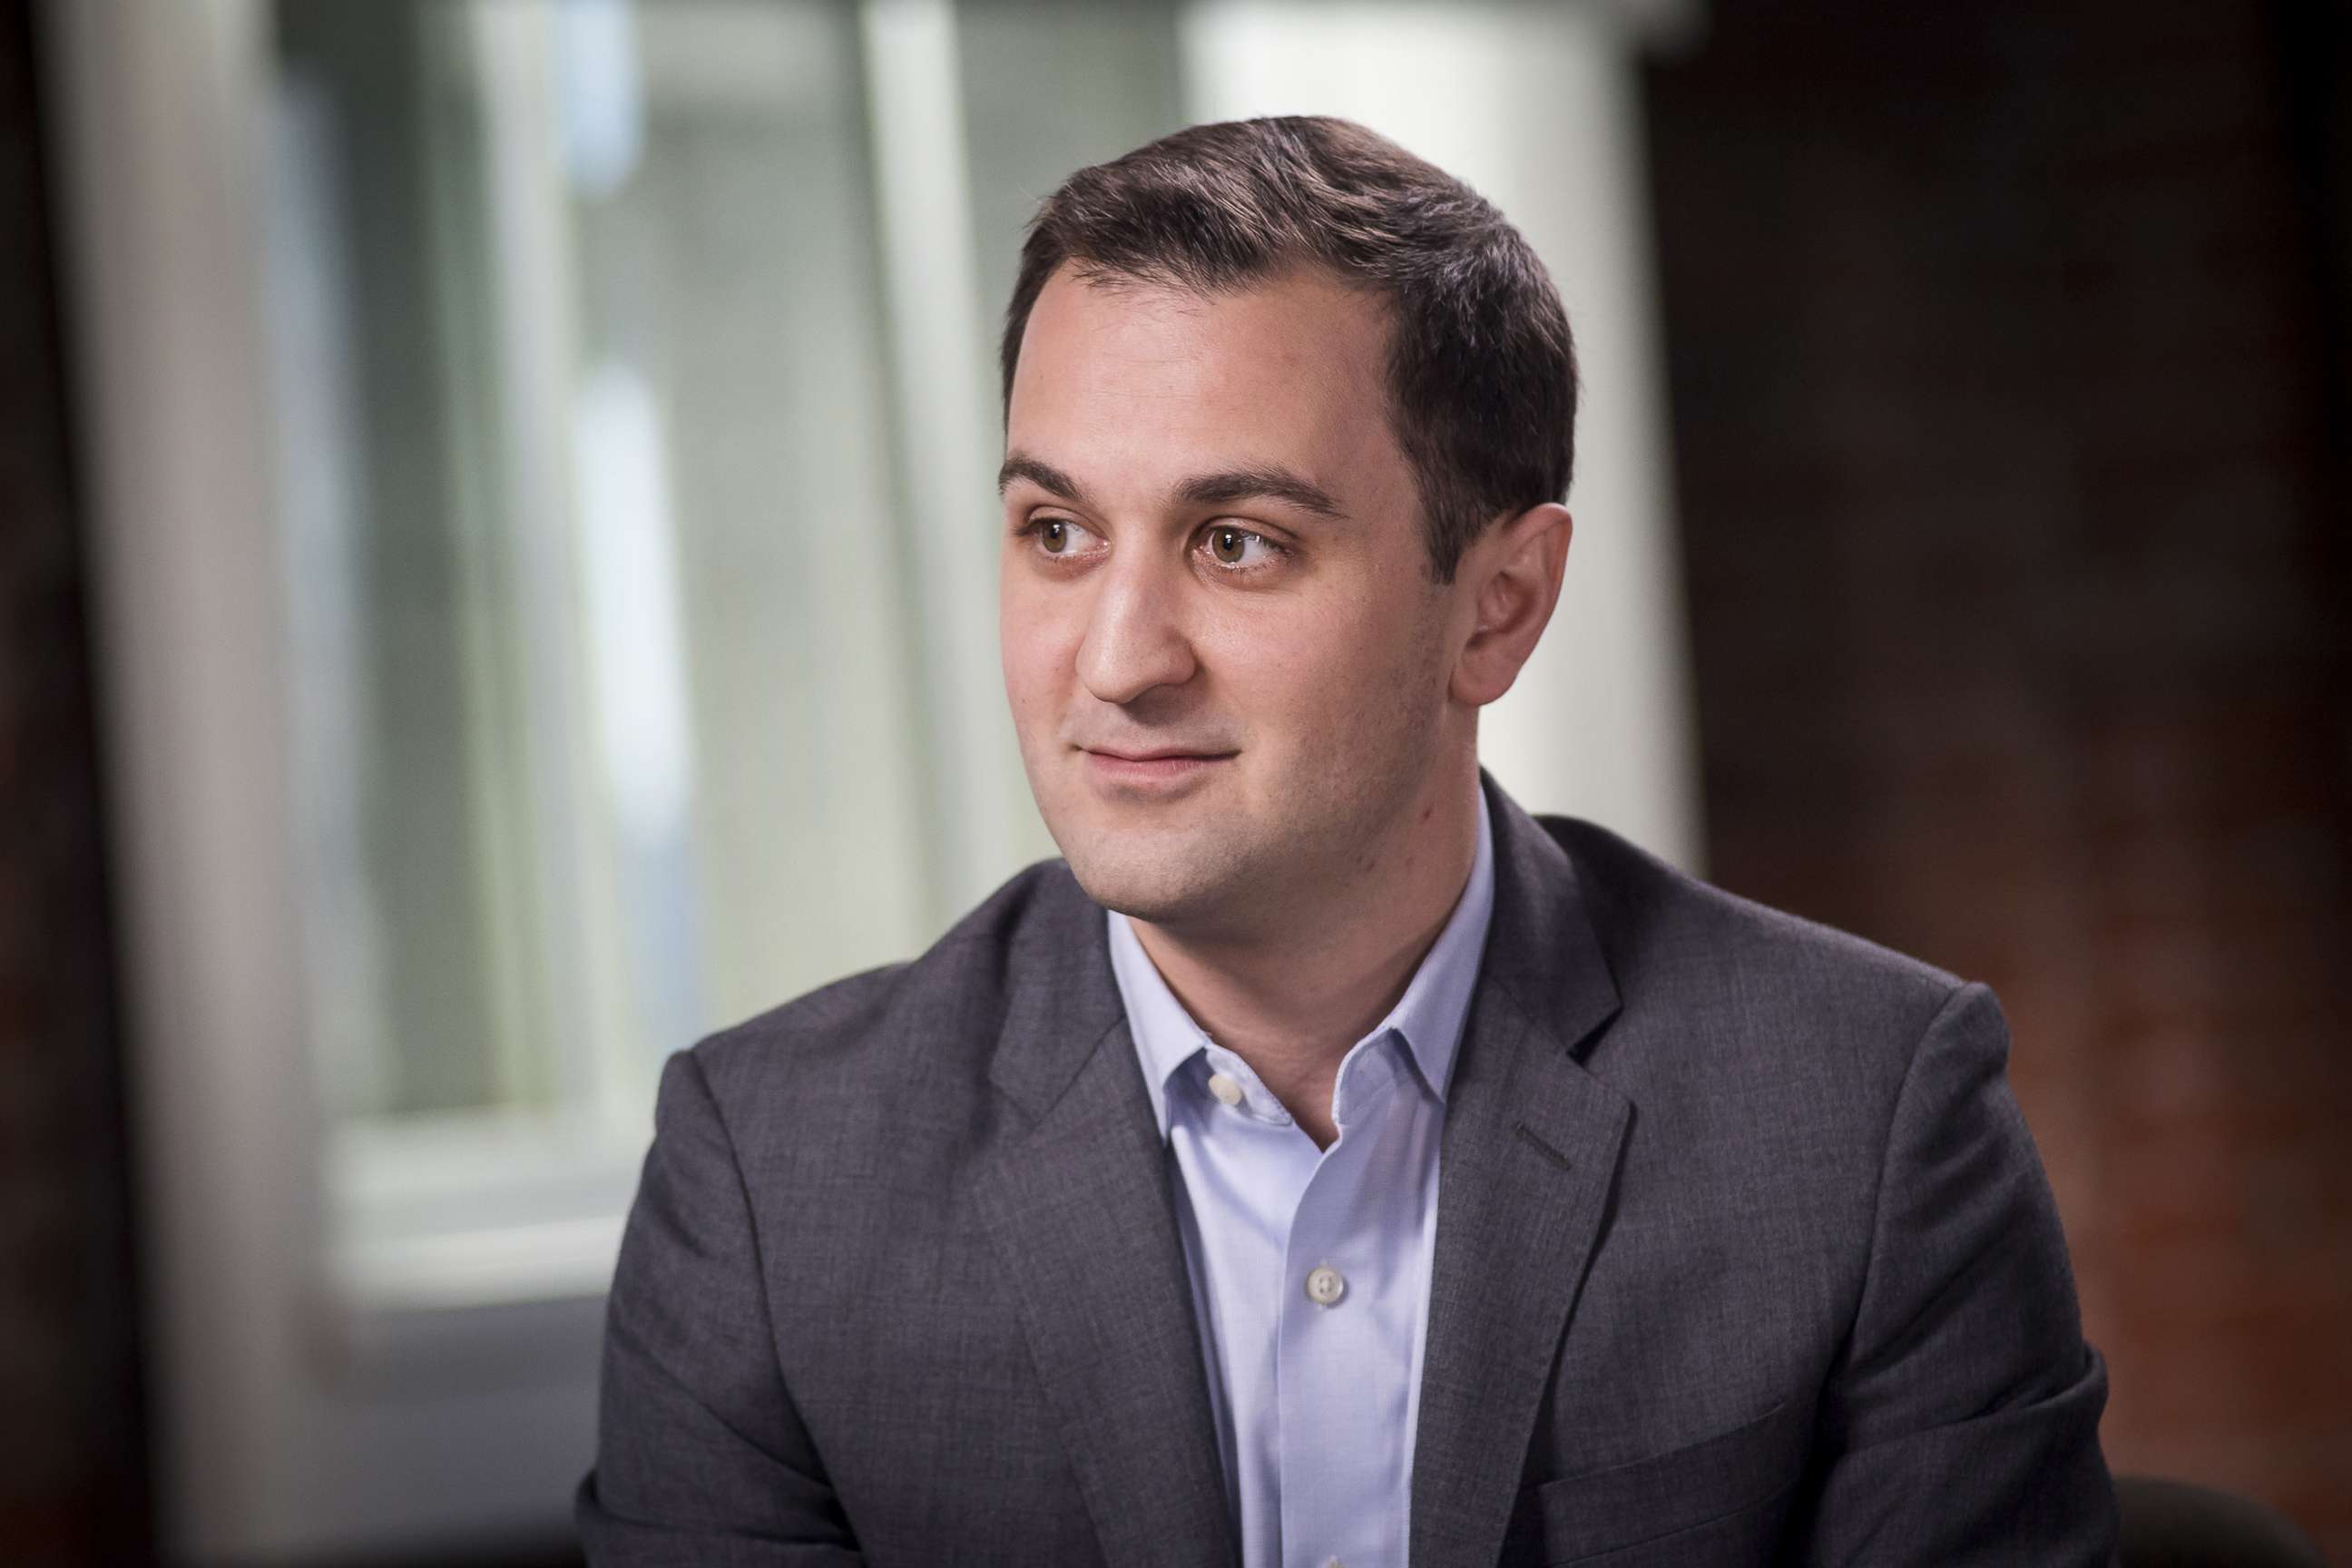 PHOTO: John Zimmer, co-founder and president of Lyft Inc., listens during a Bloomberg Studio 1.0 television interview in San Francisco, Calif. in this Feb. 27, 2018 file photo.